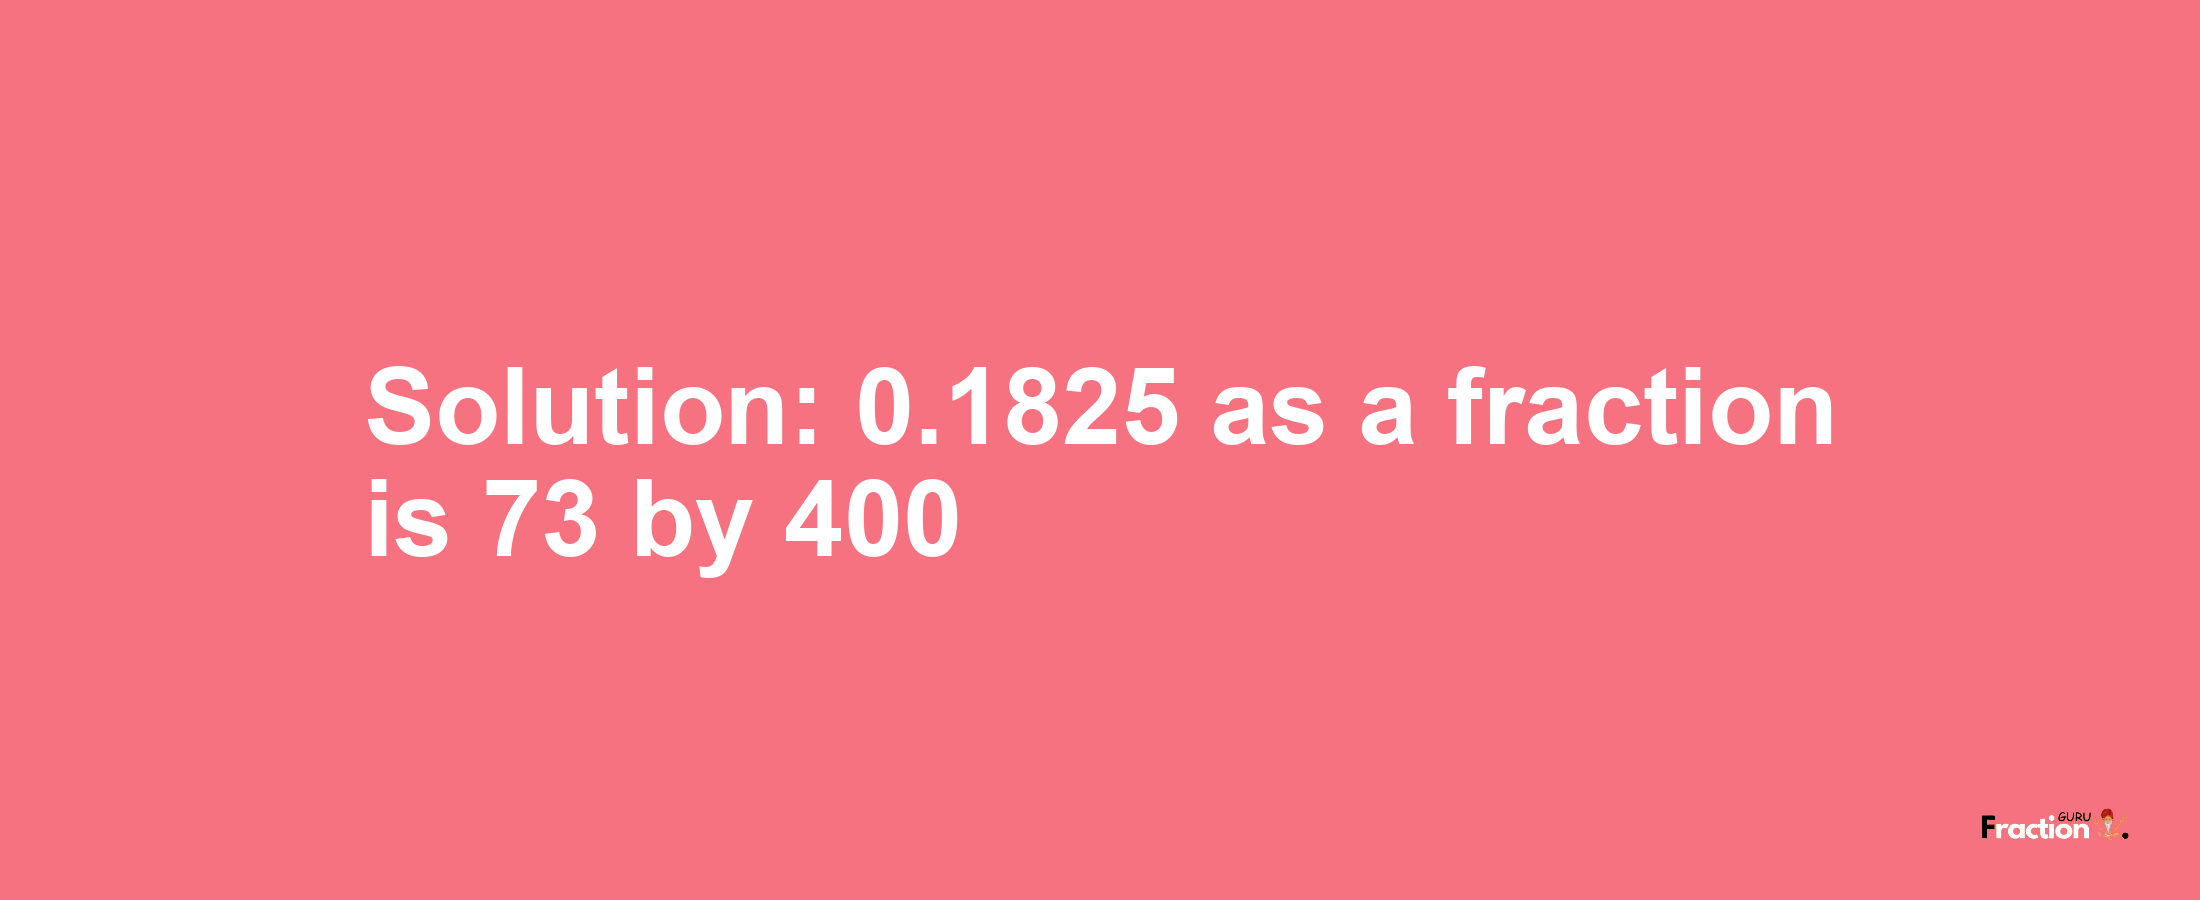 Solution:0.1825 as a fraction is 73/400